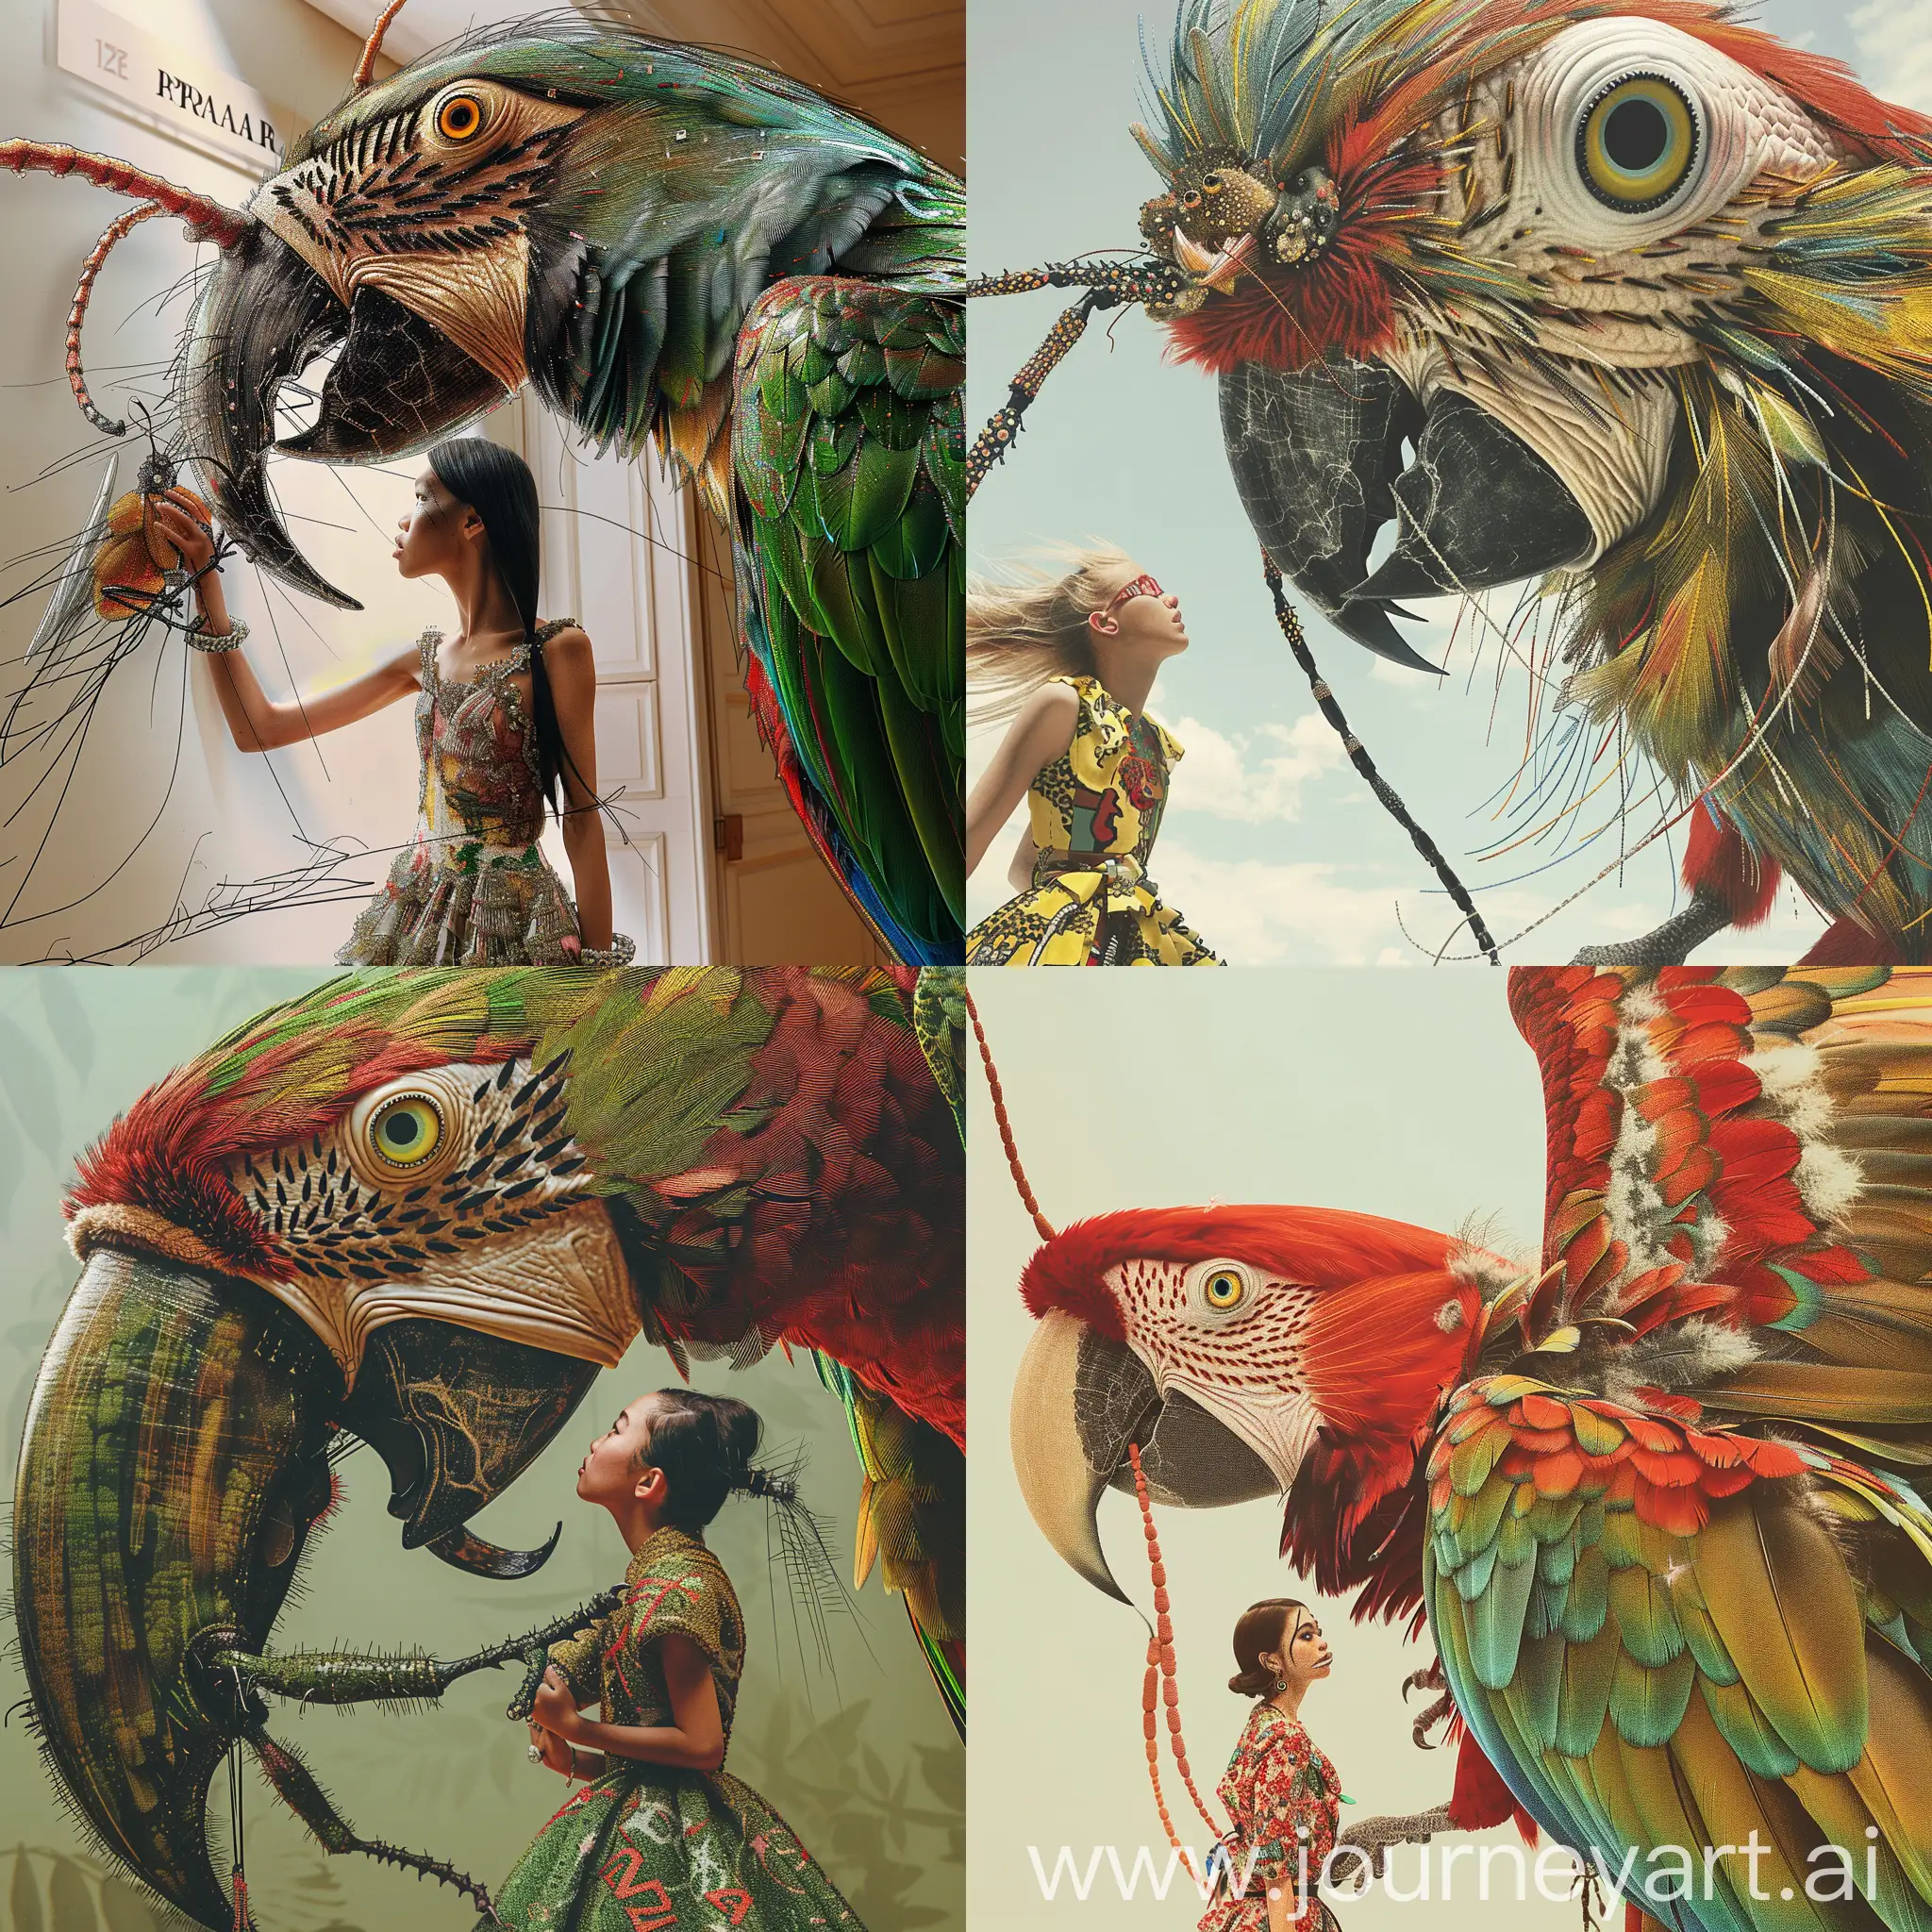 Fashionable-Encounter-PradaClad-Model-and-Towering-Exotic-Parrot-in-Harpers-Bazaar